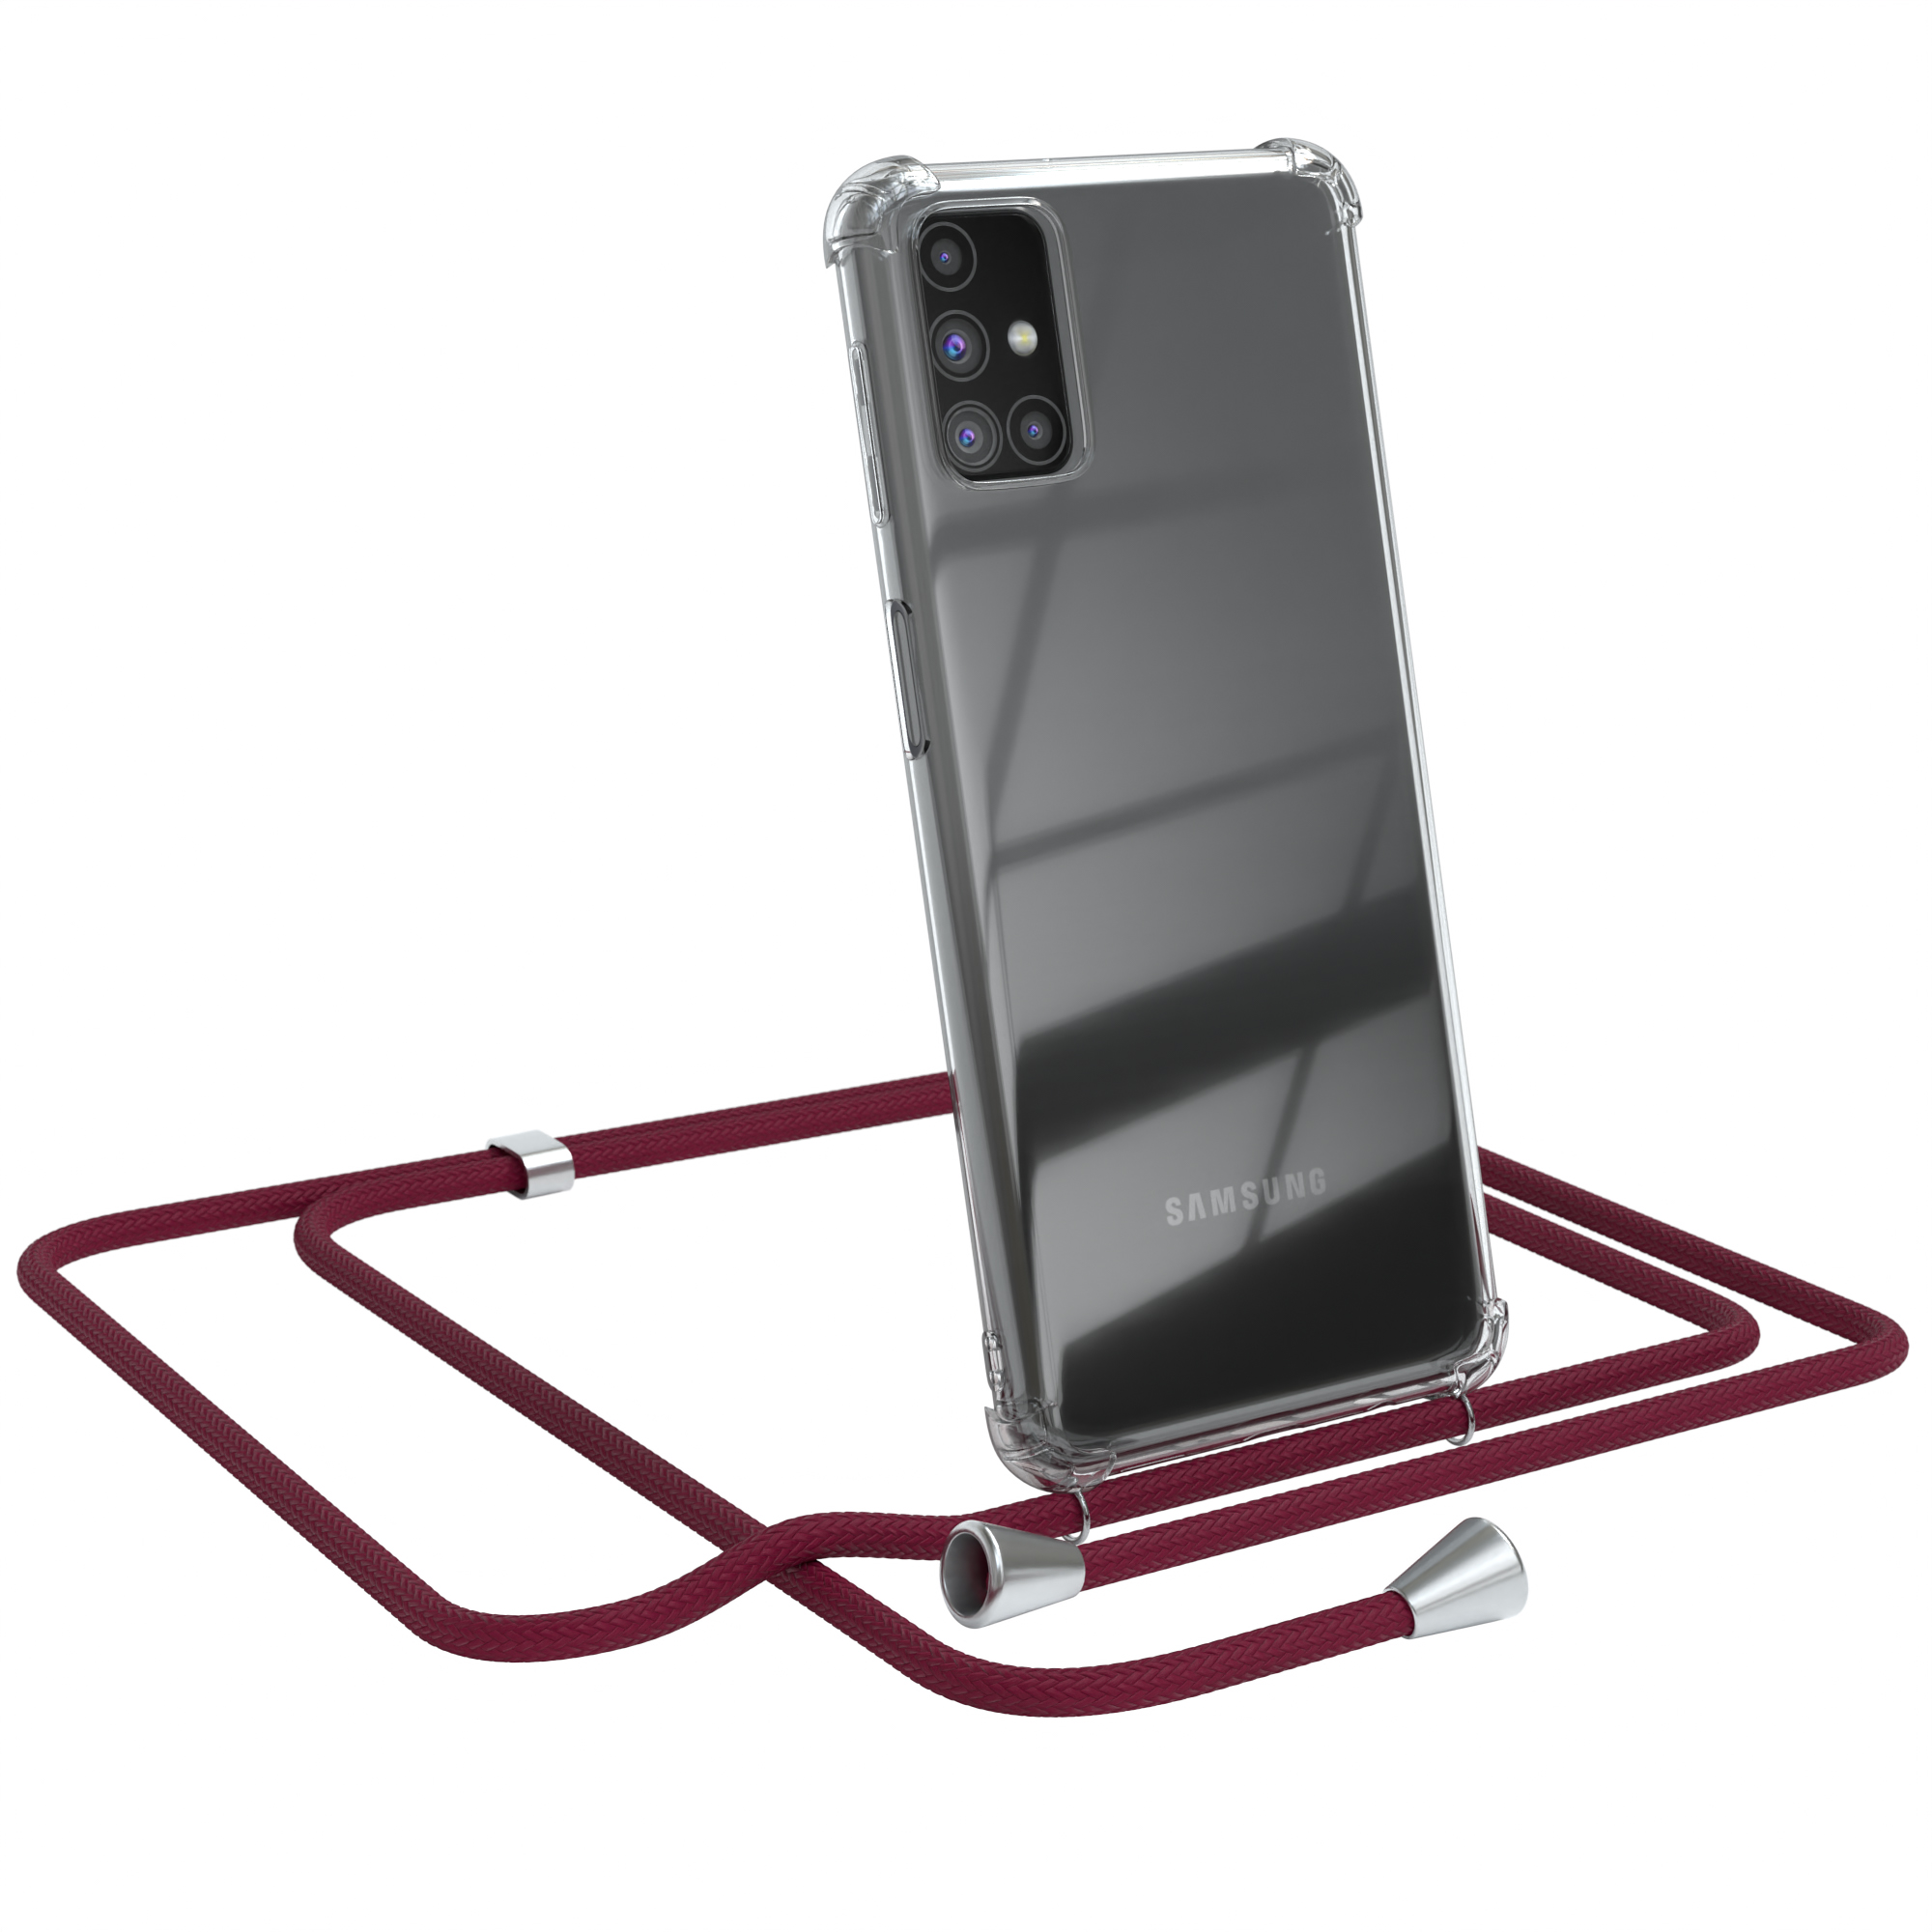 EAZY CASE Clear Galaxy mit Rot Cover Silber / Umhängeband, Clips Umhängetasche, Bordeaux Samsung, M31s